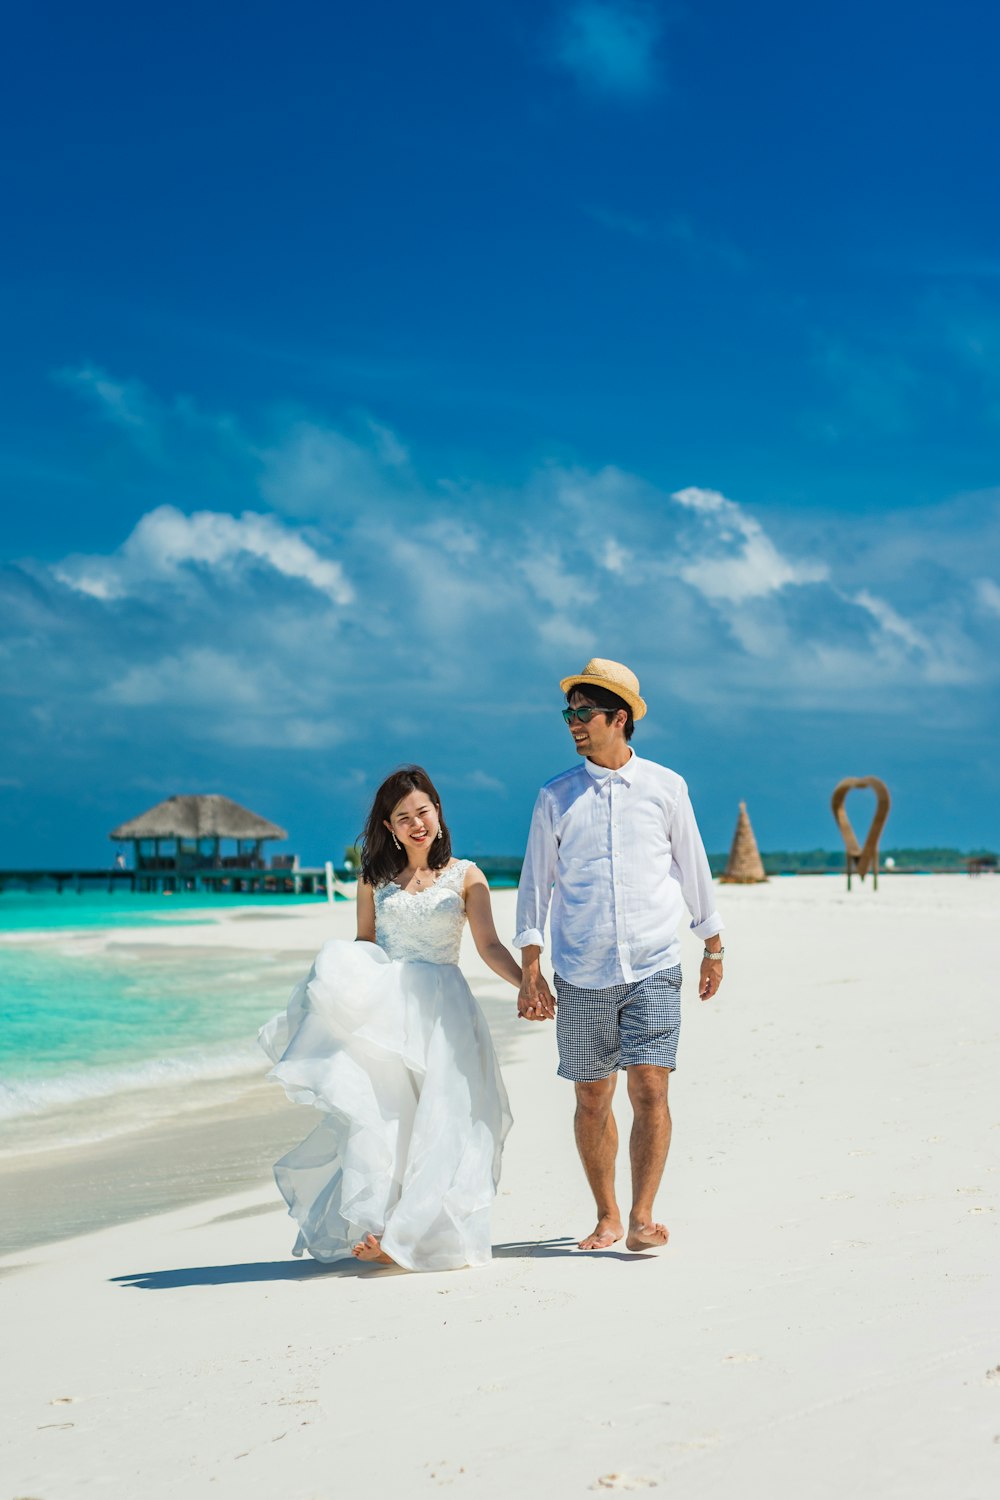 man and woman standing on beach during daytime